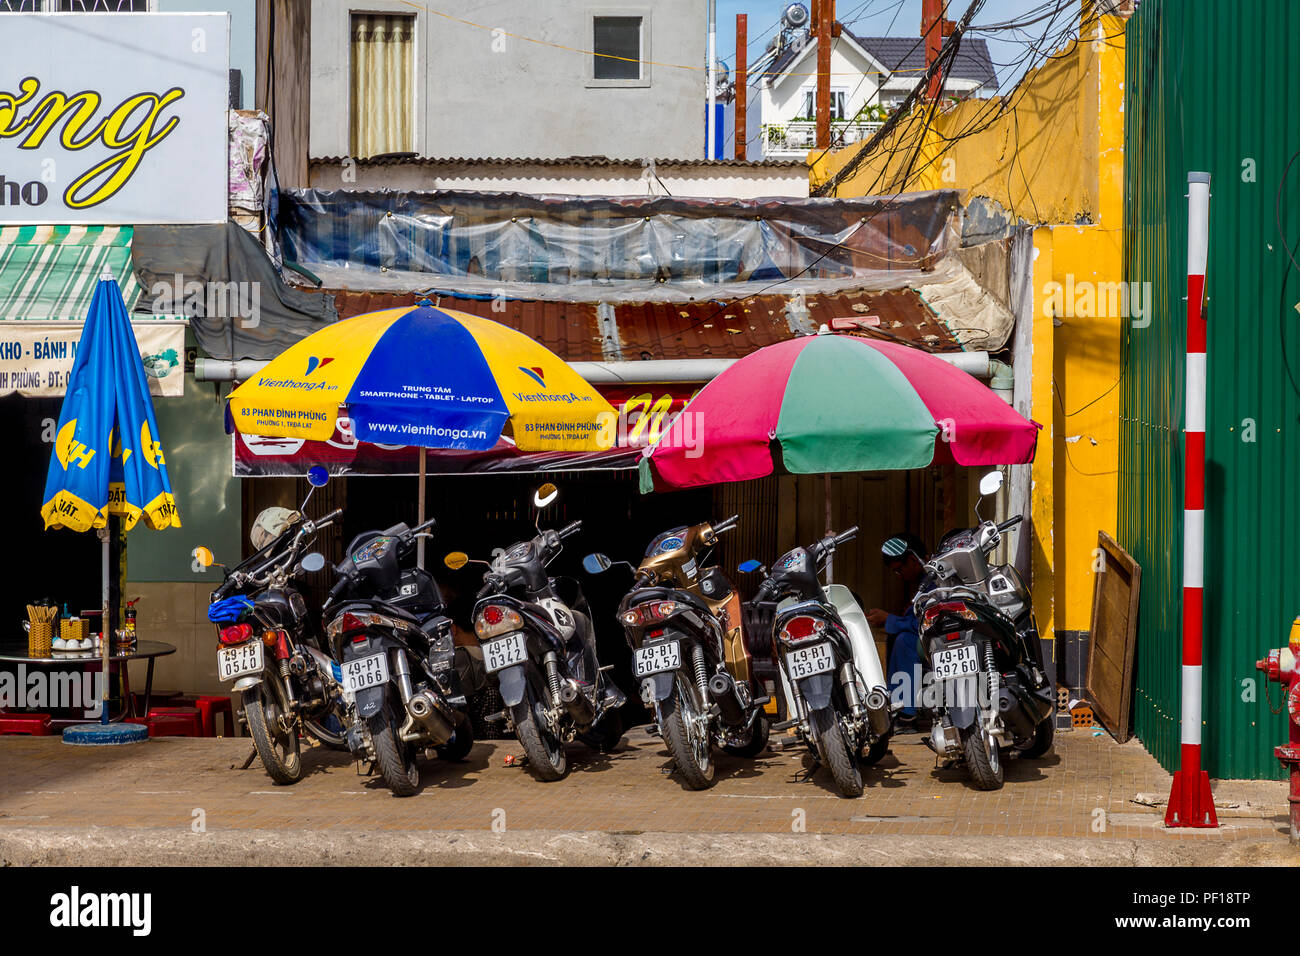 Motorcycles parked in front of a cafe under colorful umbrellas in Dalat Stock Photo